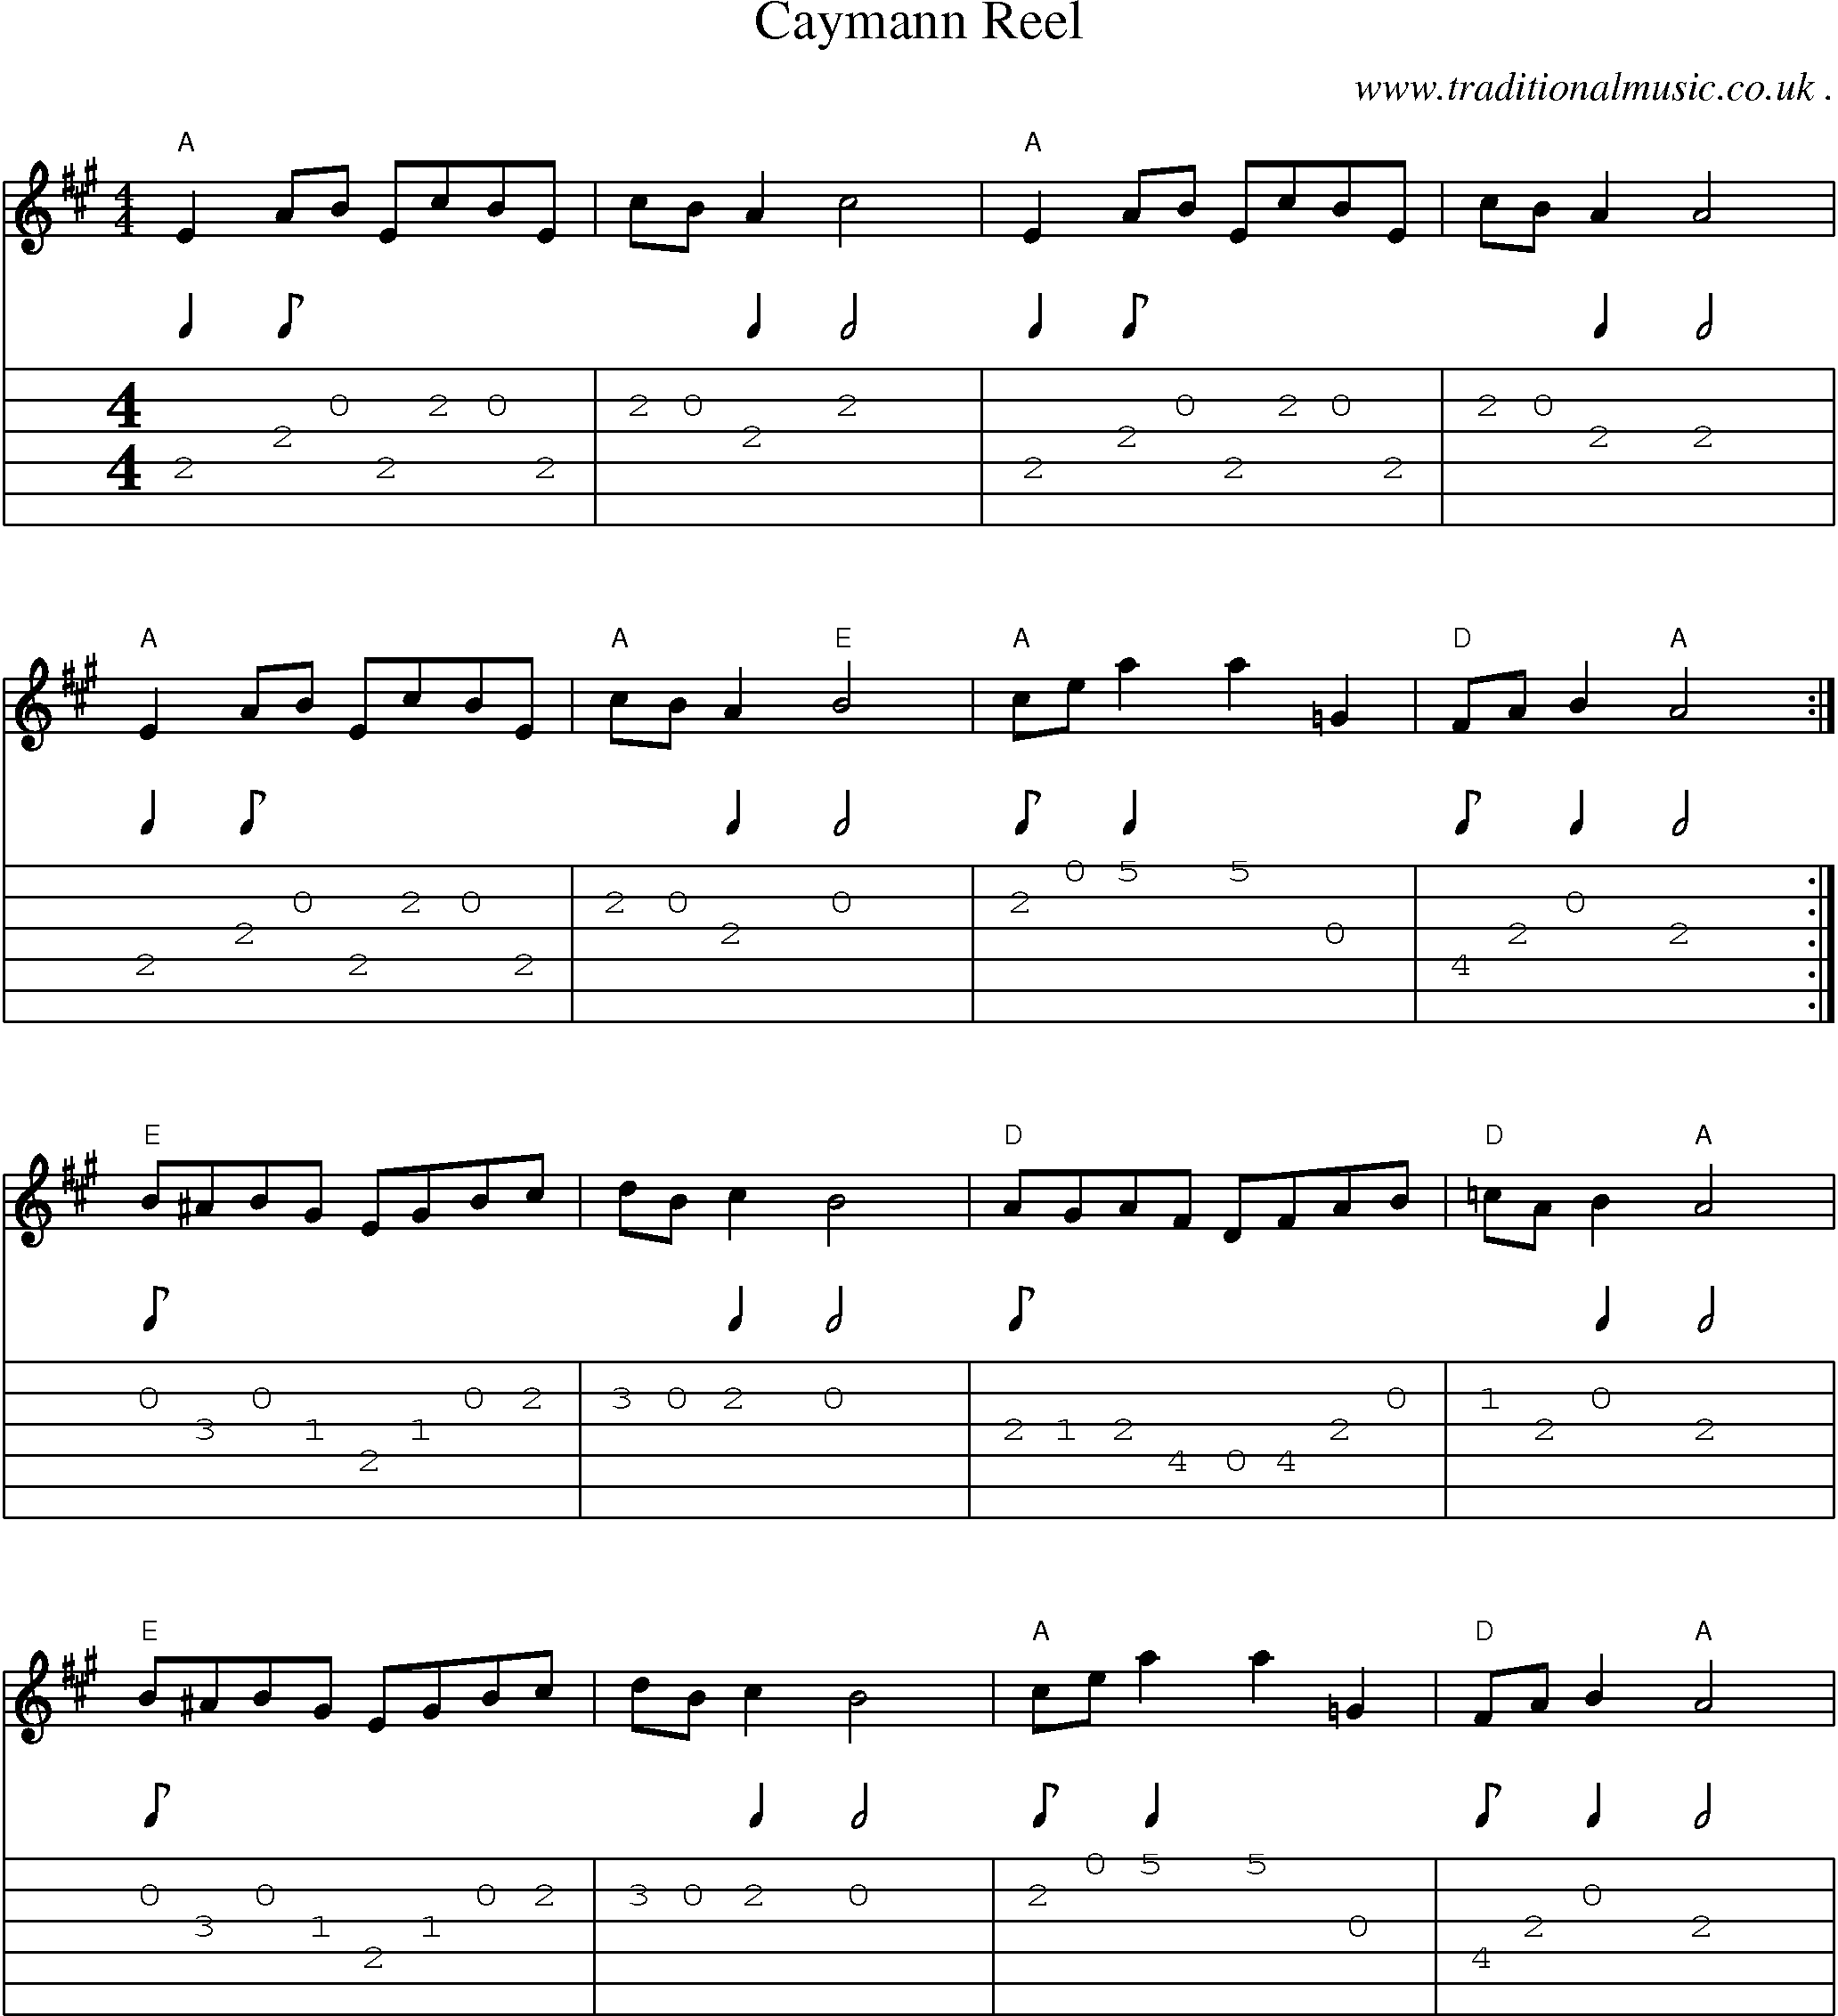 Sheet-Music and Guitar Tabs for Caymann Reel